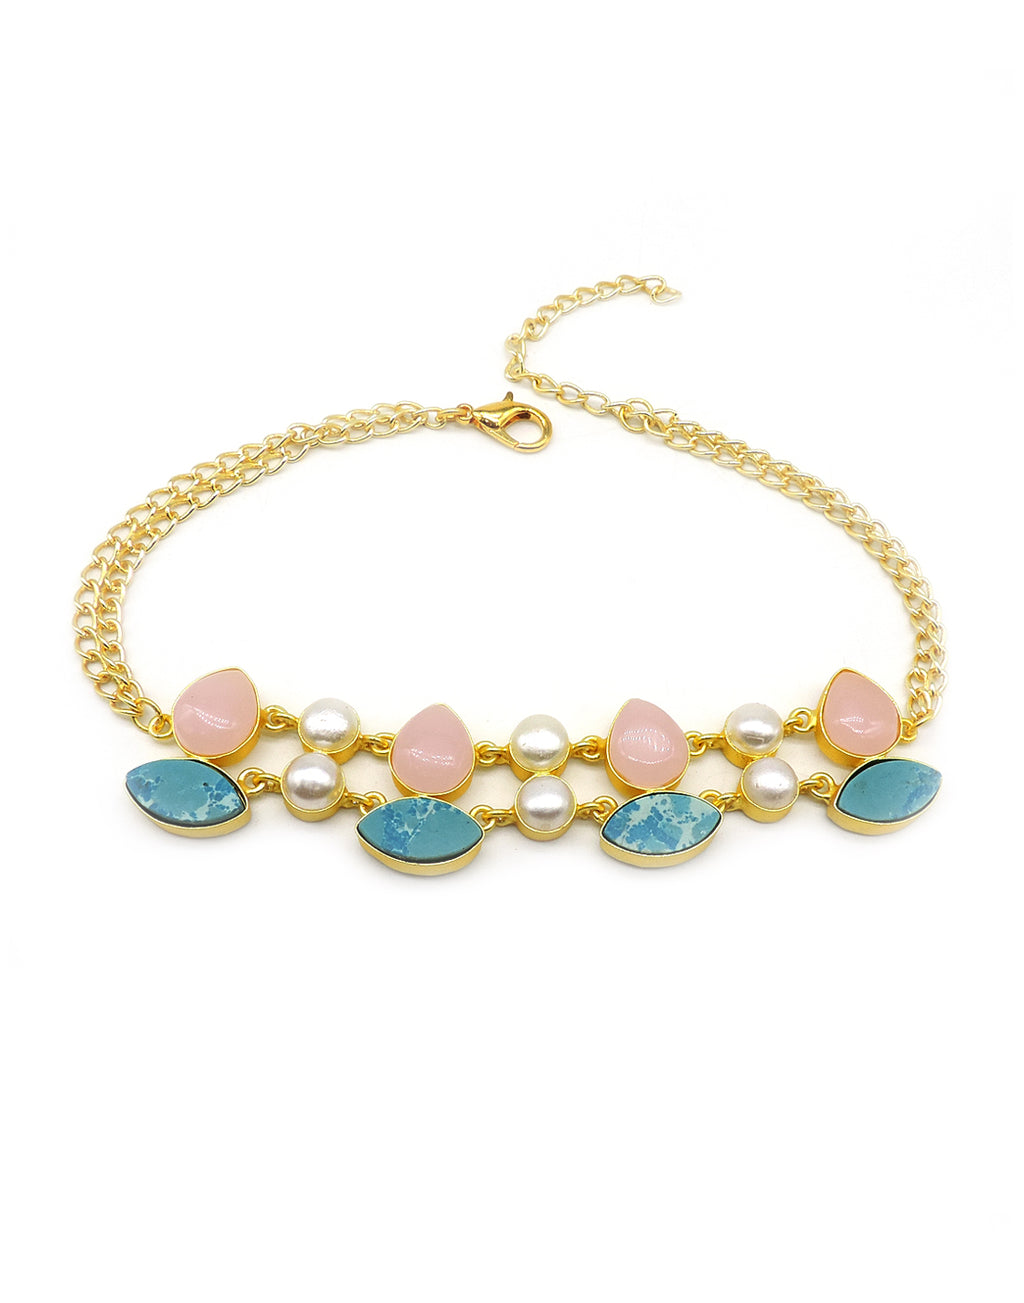 Blush & Blue Necklace - Statement Necklaces - Gold-Plated & Hypoallergenic Jewellery - Made in India - Dubai Jewellery - Dori